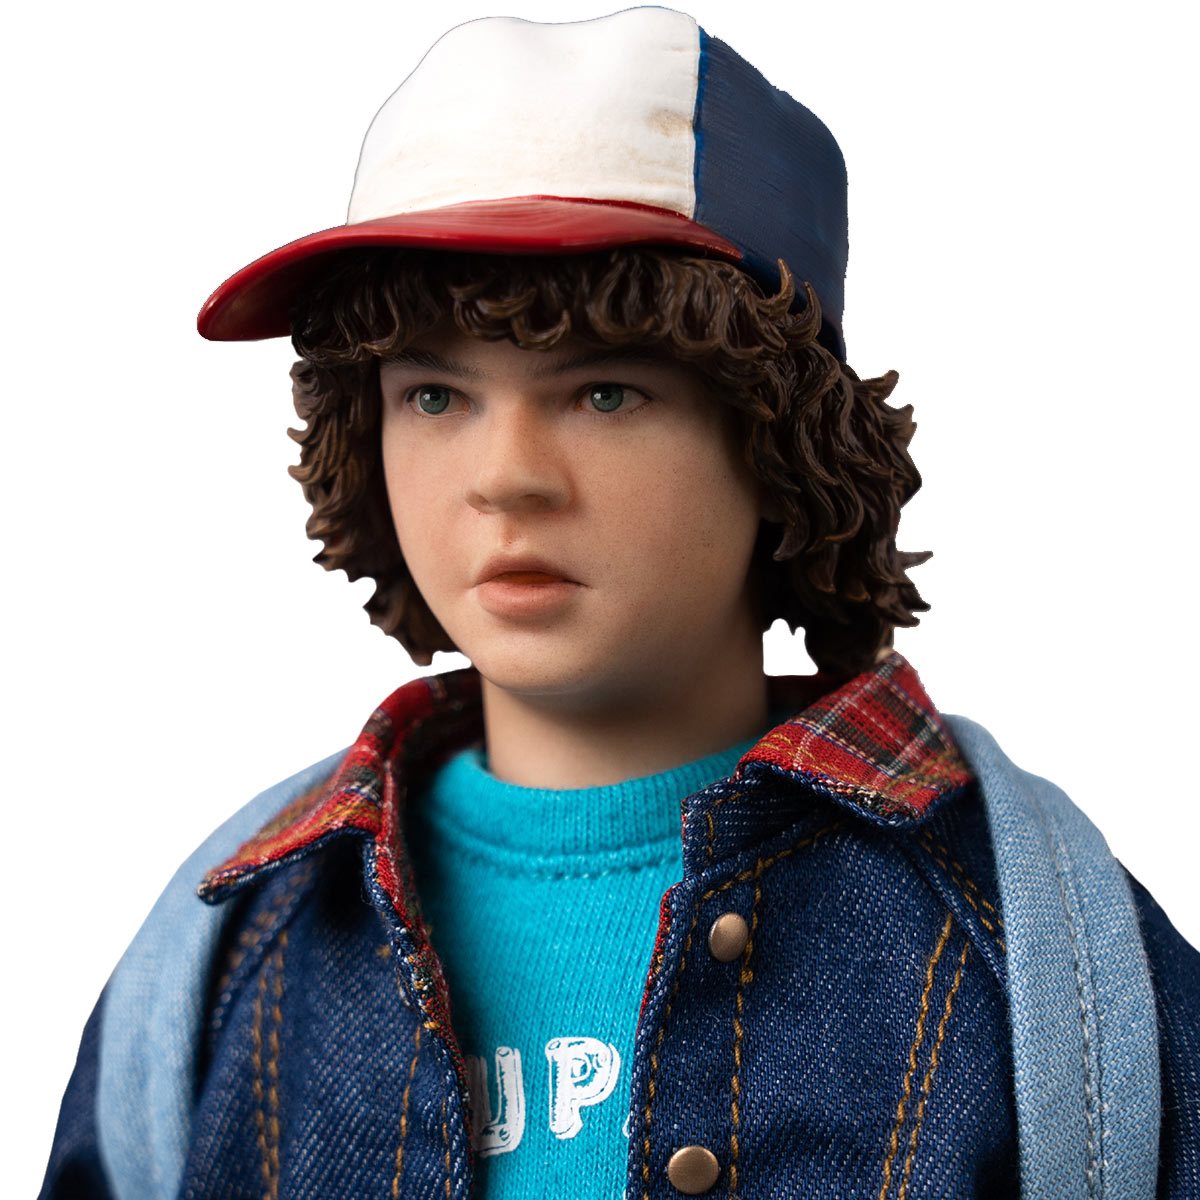 Threezero Stranger Things: Will Byers 1:6 Scale Collectible Figure